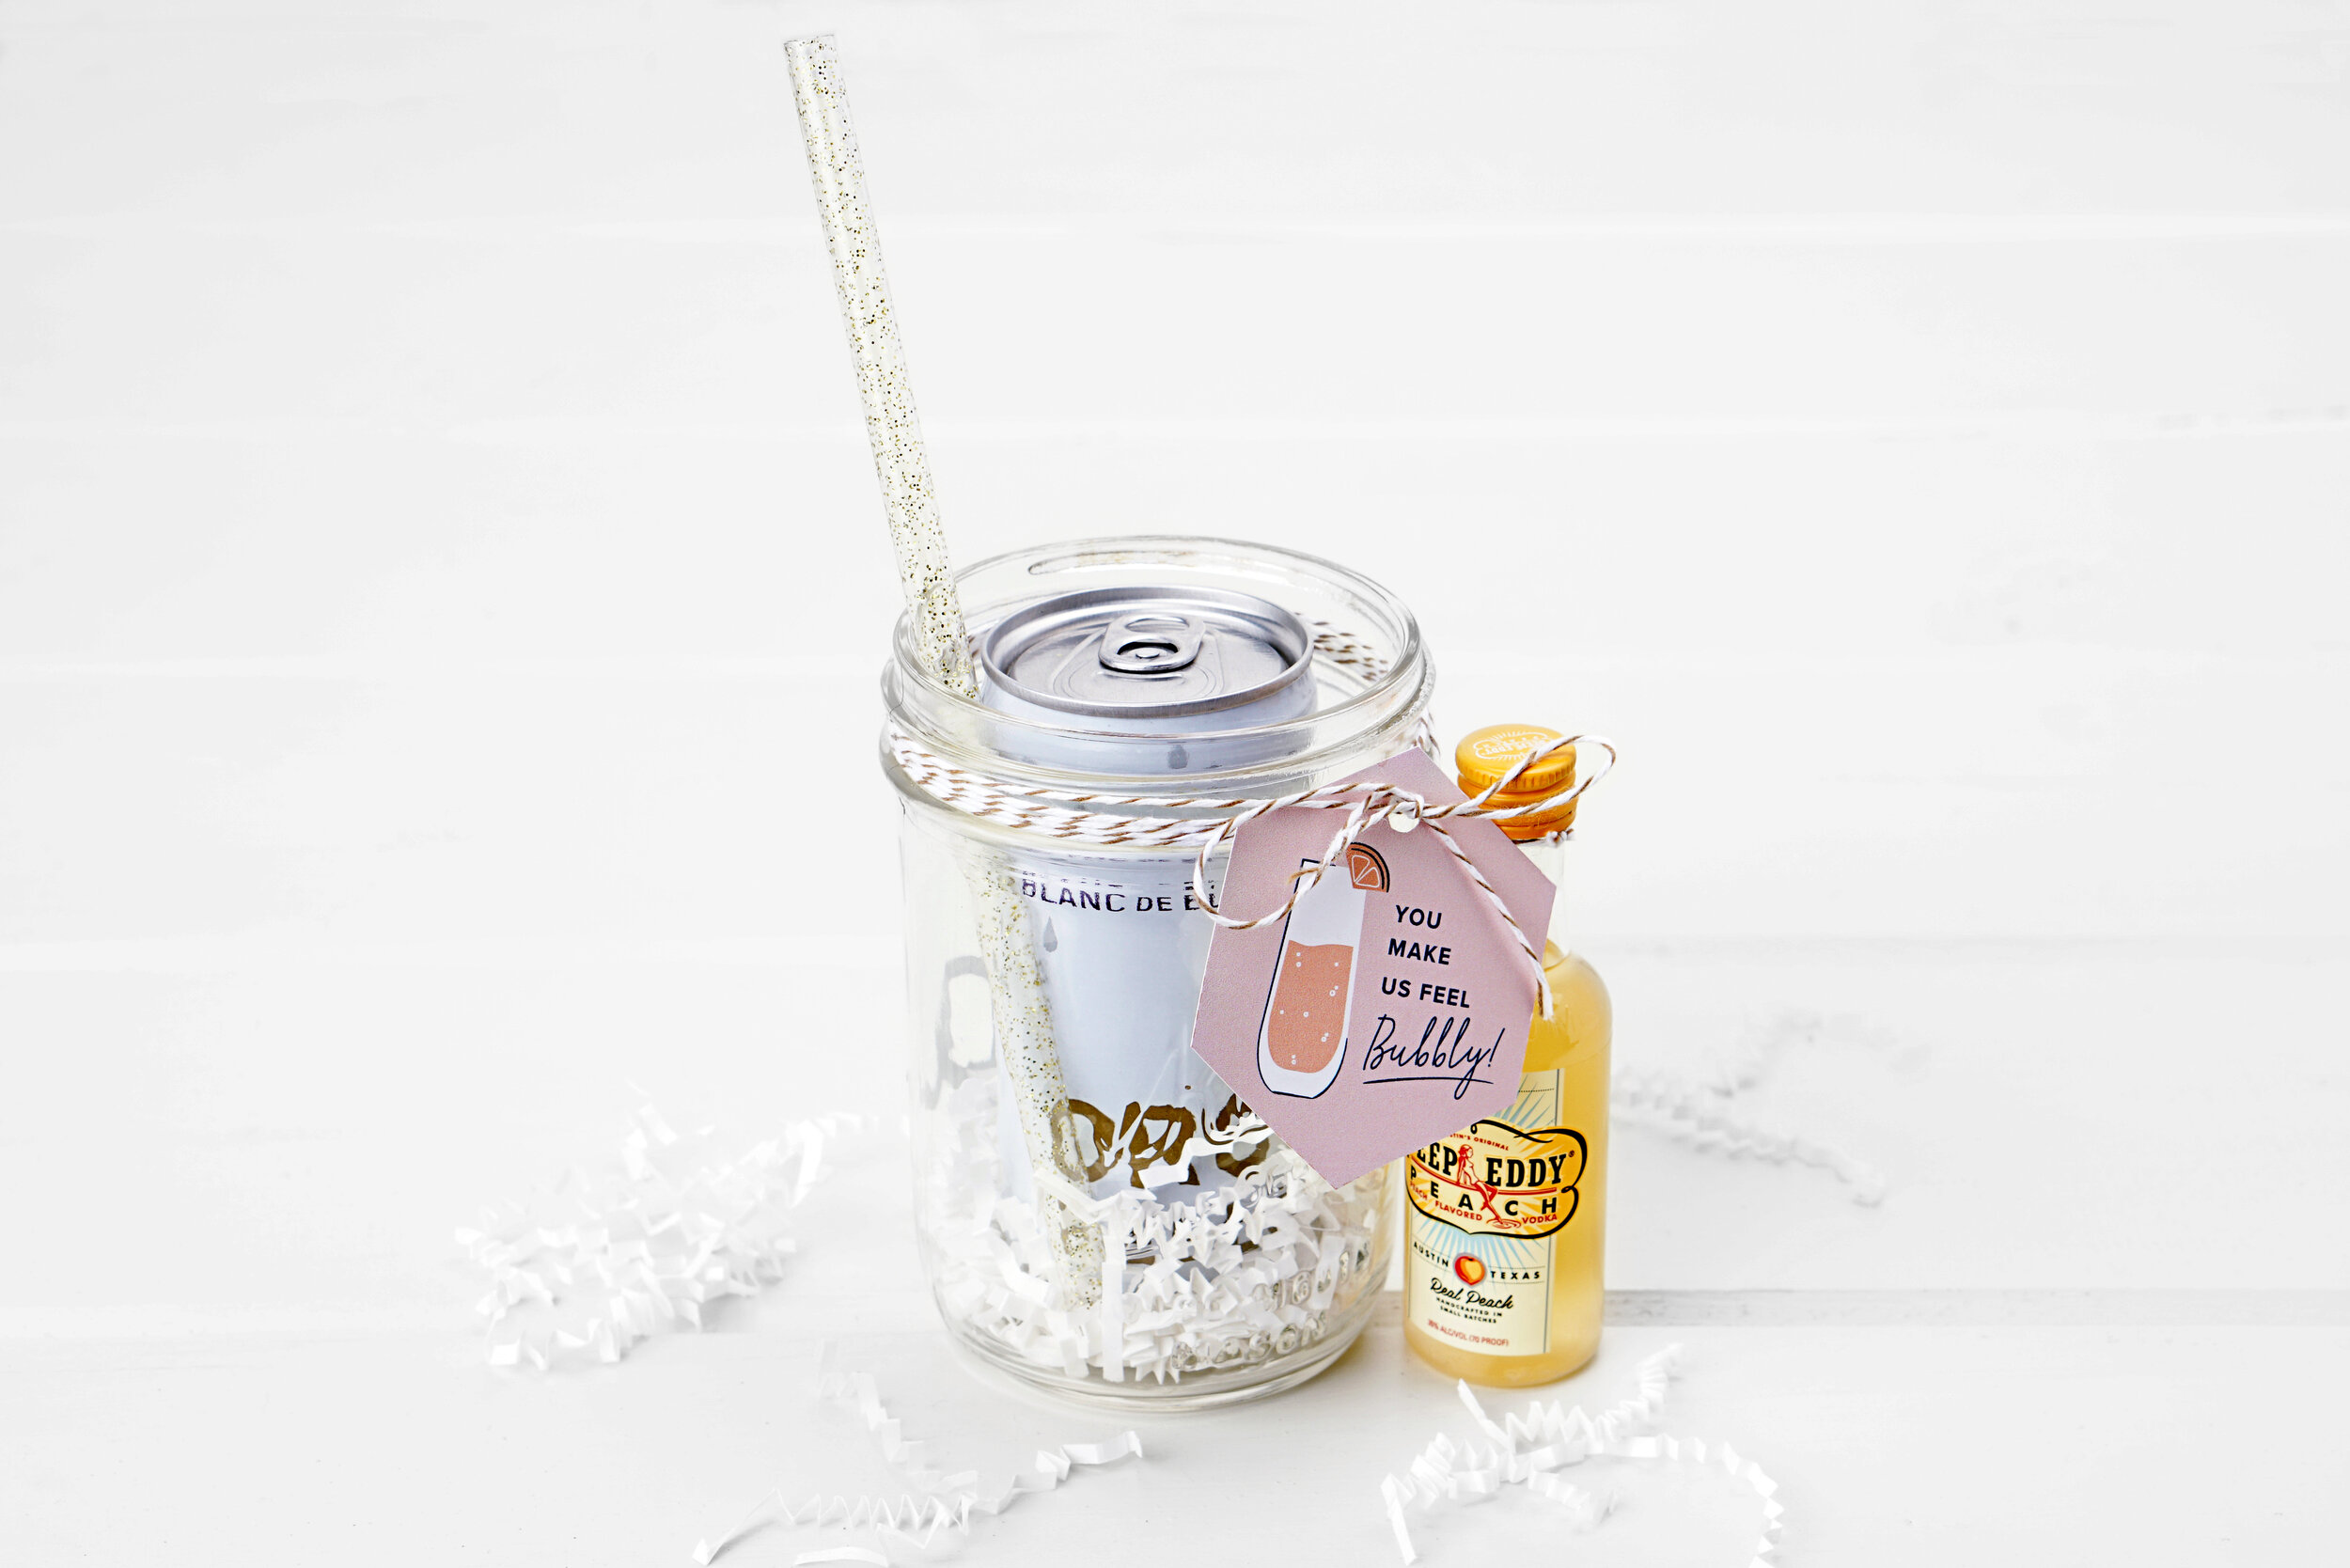 DIY Mason Jar Cocktail Kits Your Guests Will Adore - Zola Expert Wedding  Advice